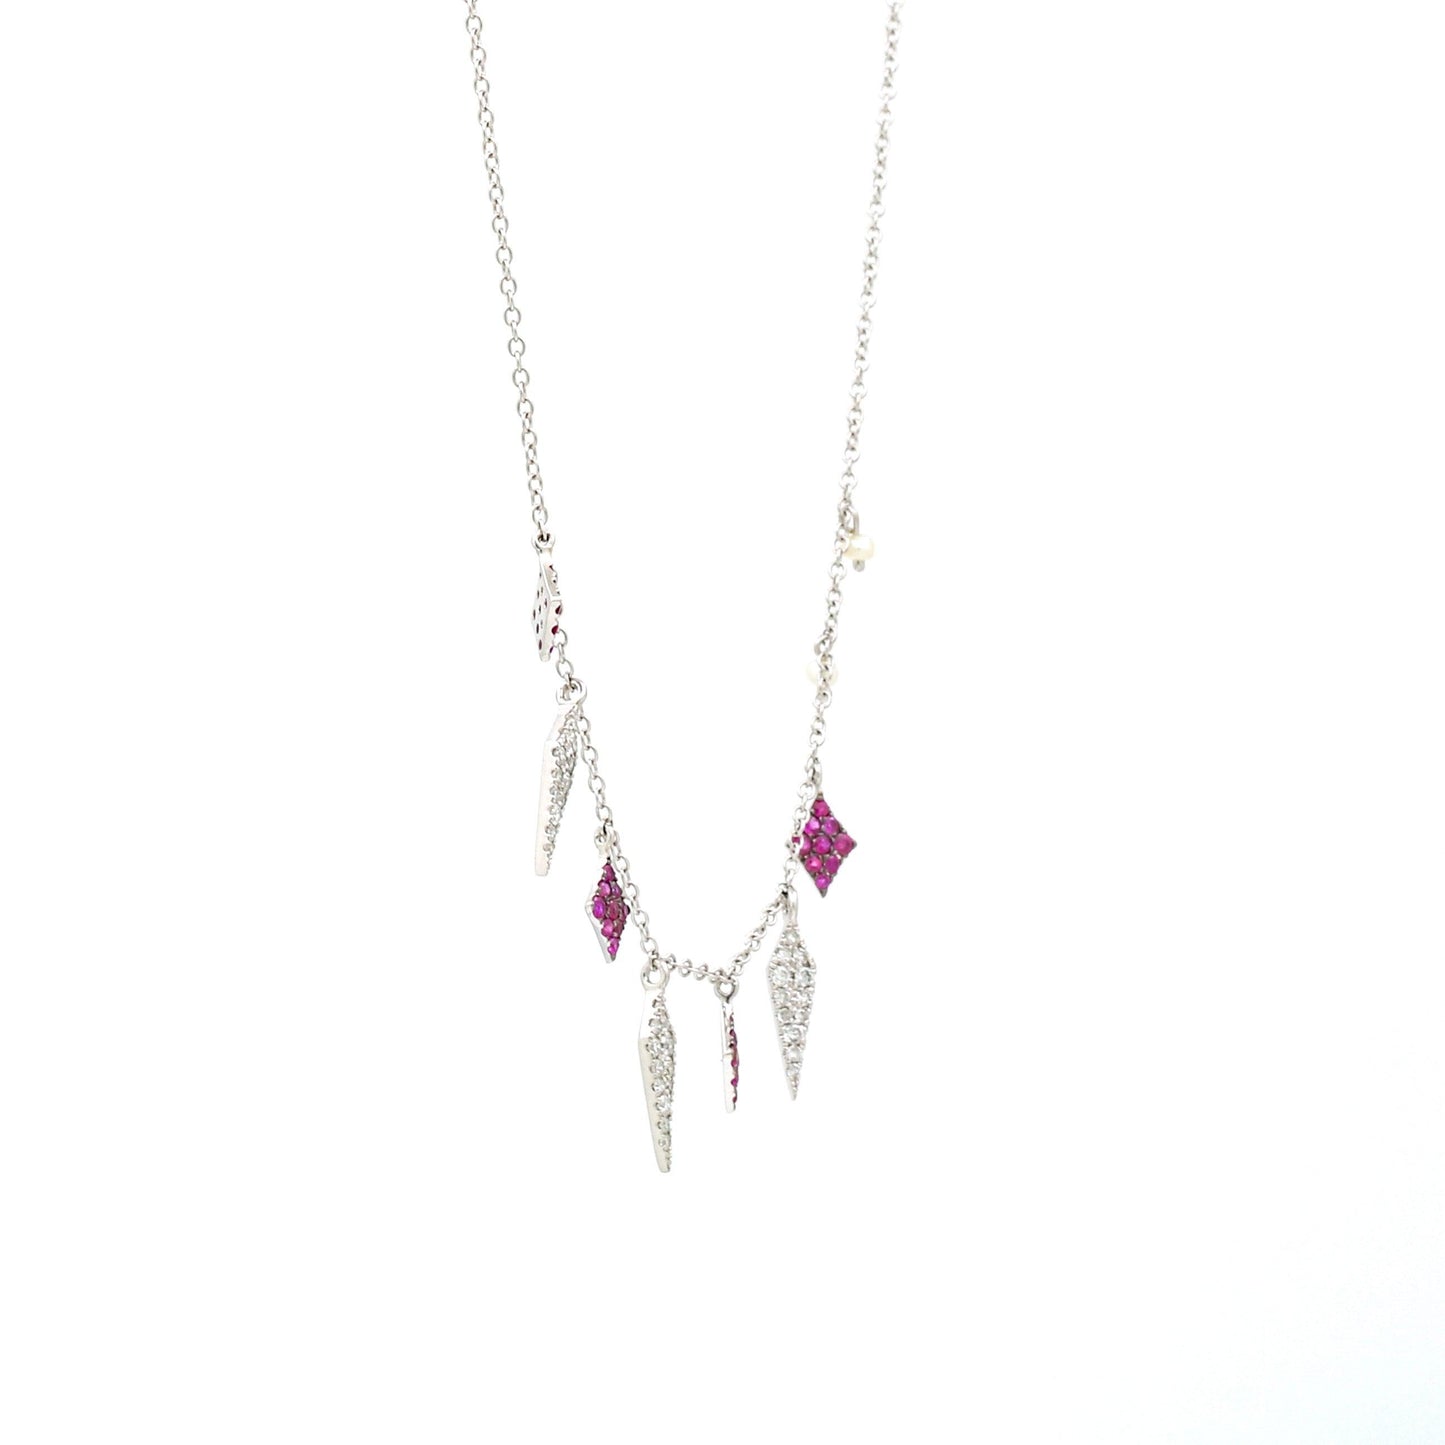 Women's Pave Diamond Ruby Dangling Charms Necklace in 14k White Gold - 31 Jewels Inc.